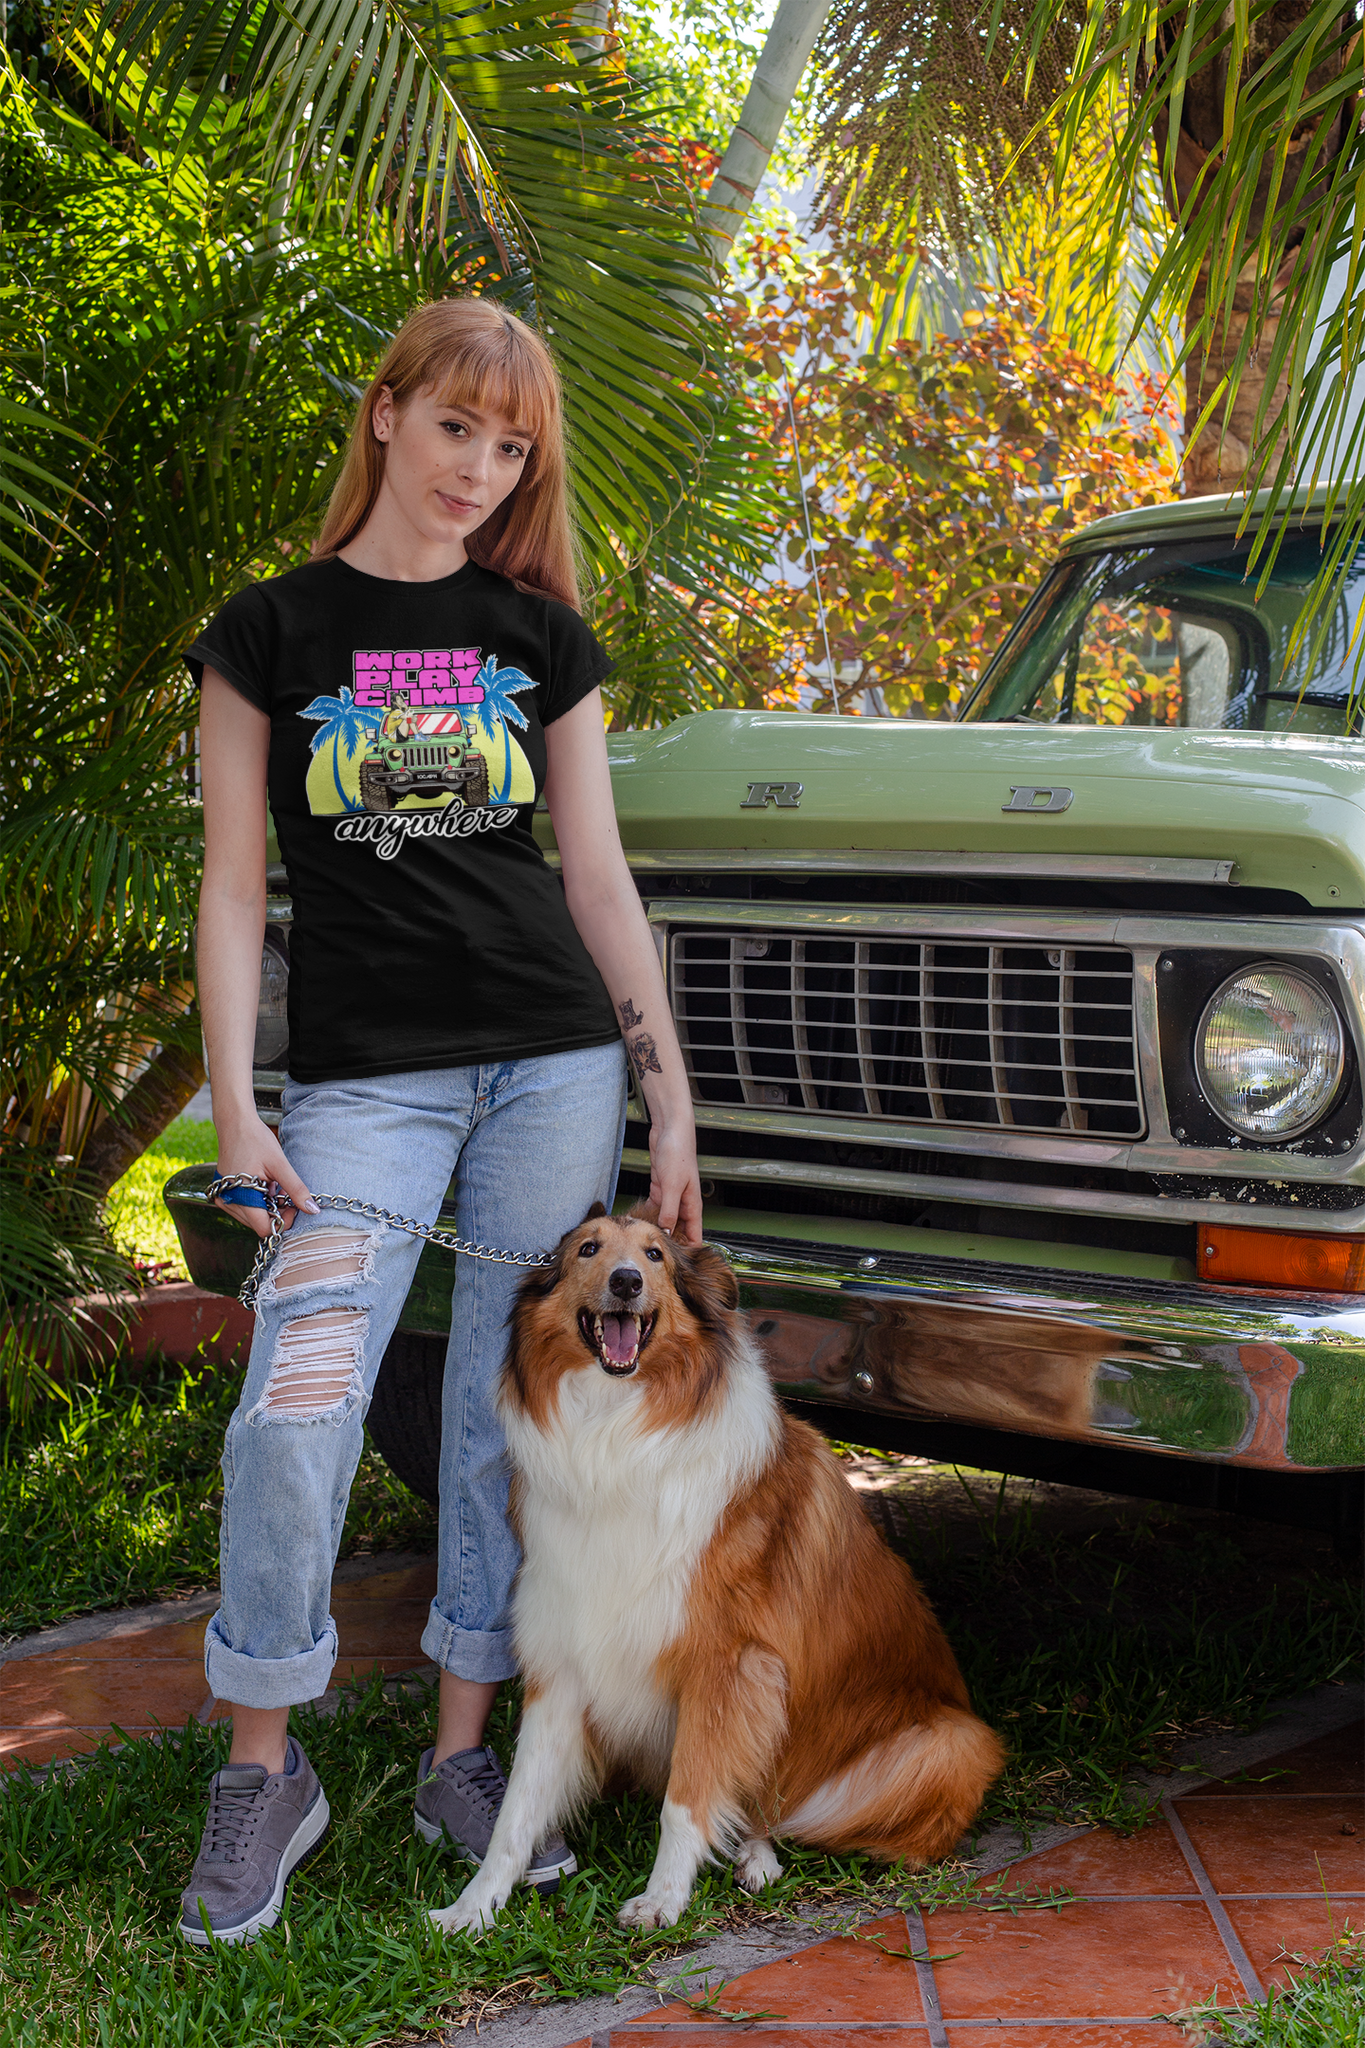 A woman standing with her dog in front of a truck. She is wearing a black tee shirt with the image of a Jeep Wrangler, and text reading "Work, Play, Climb Anywhere"